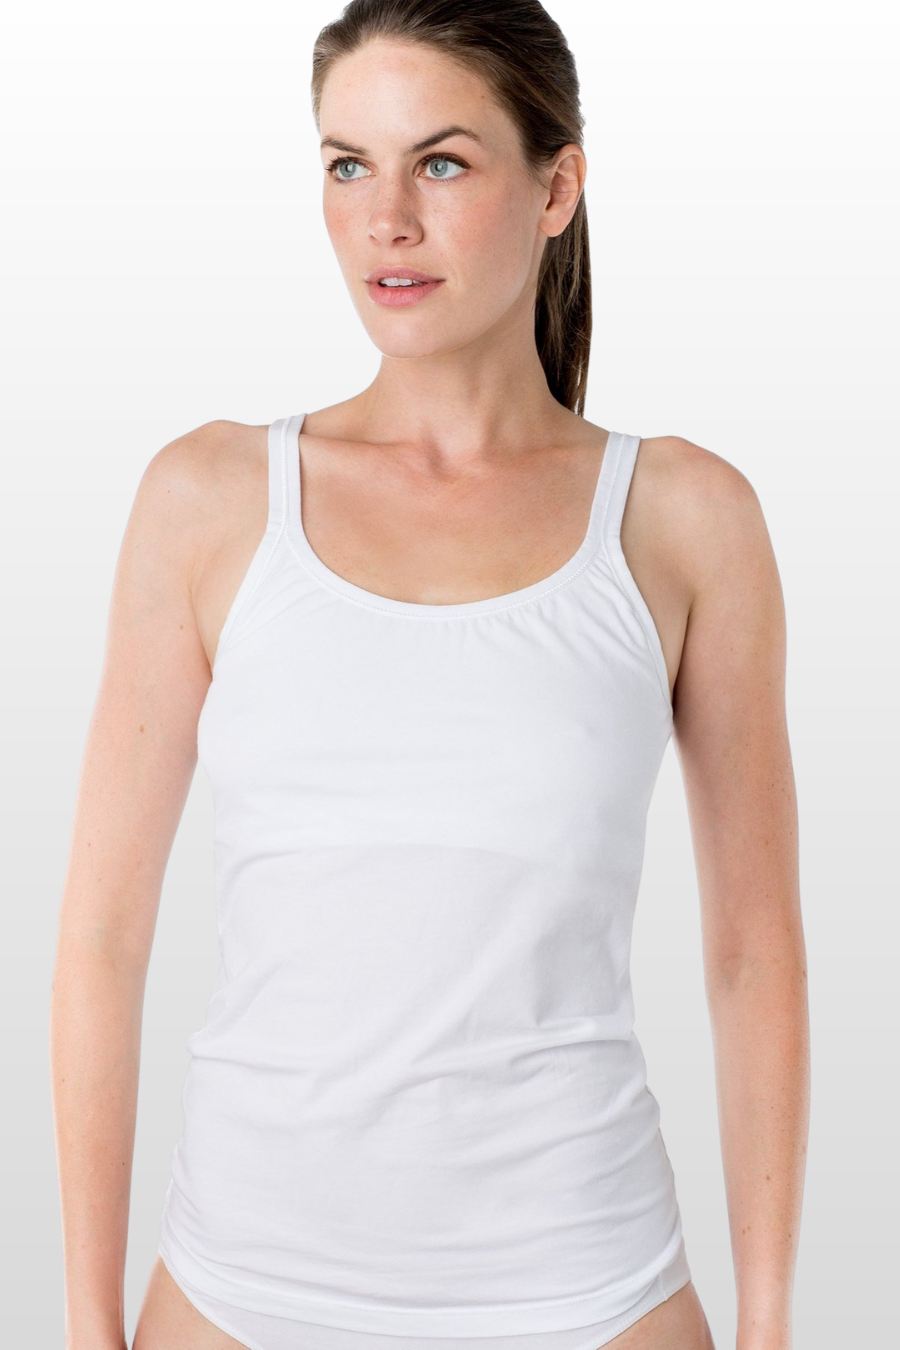 Women Cami Camisole With Built in Bra Push Up Padded Vest Layer